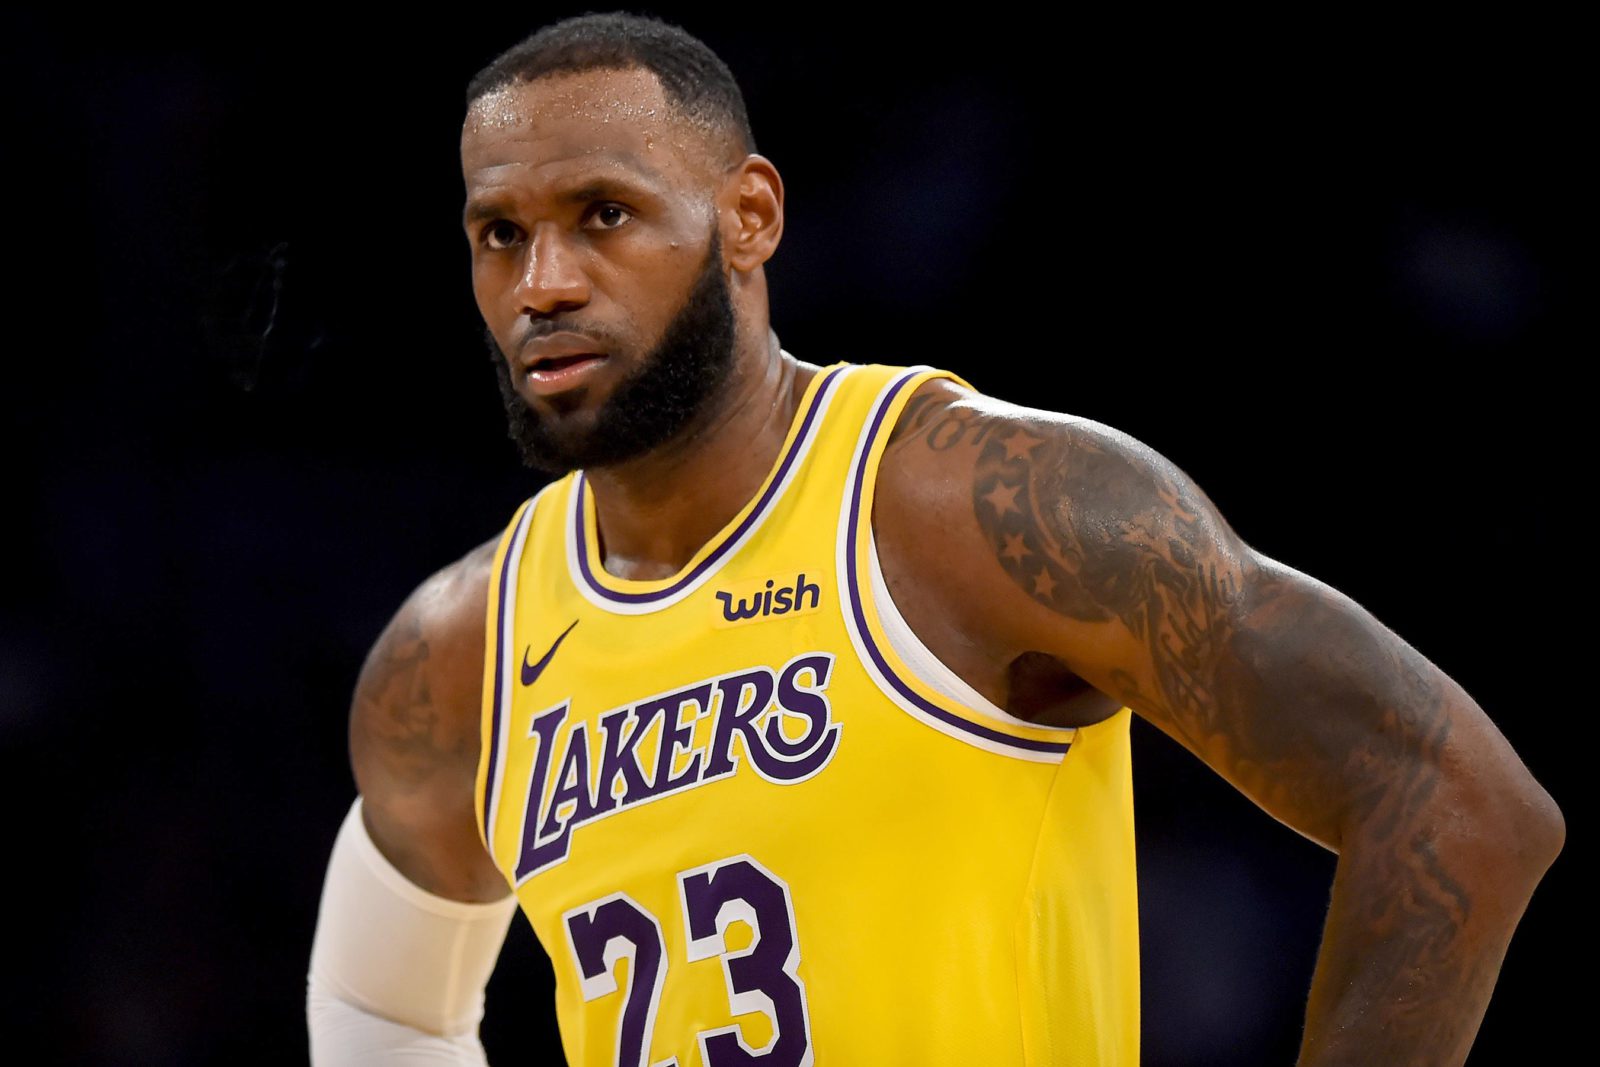 LeBron James Contact Details (Phone Number, House address, Email Address)